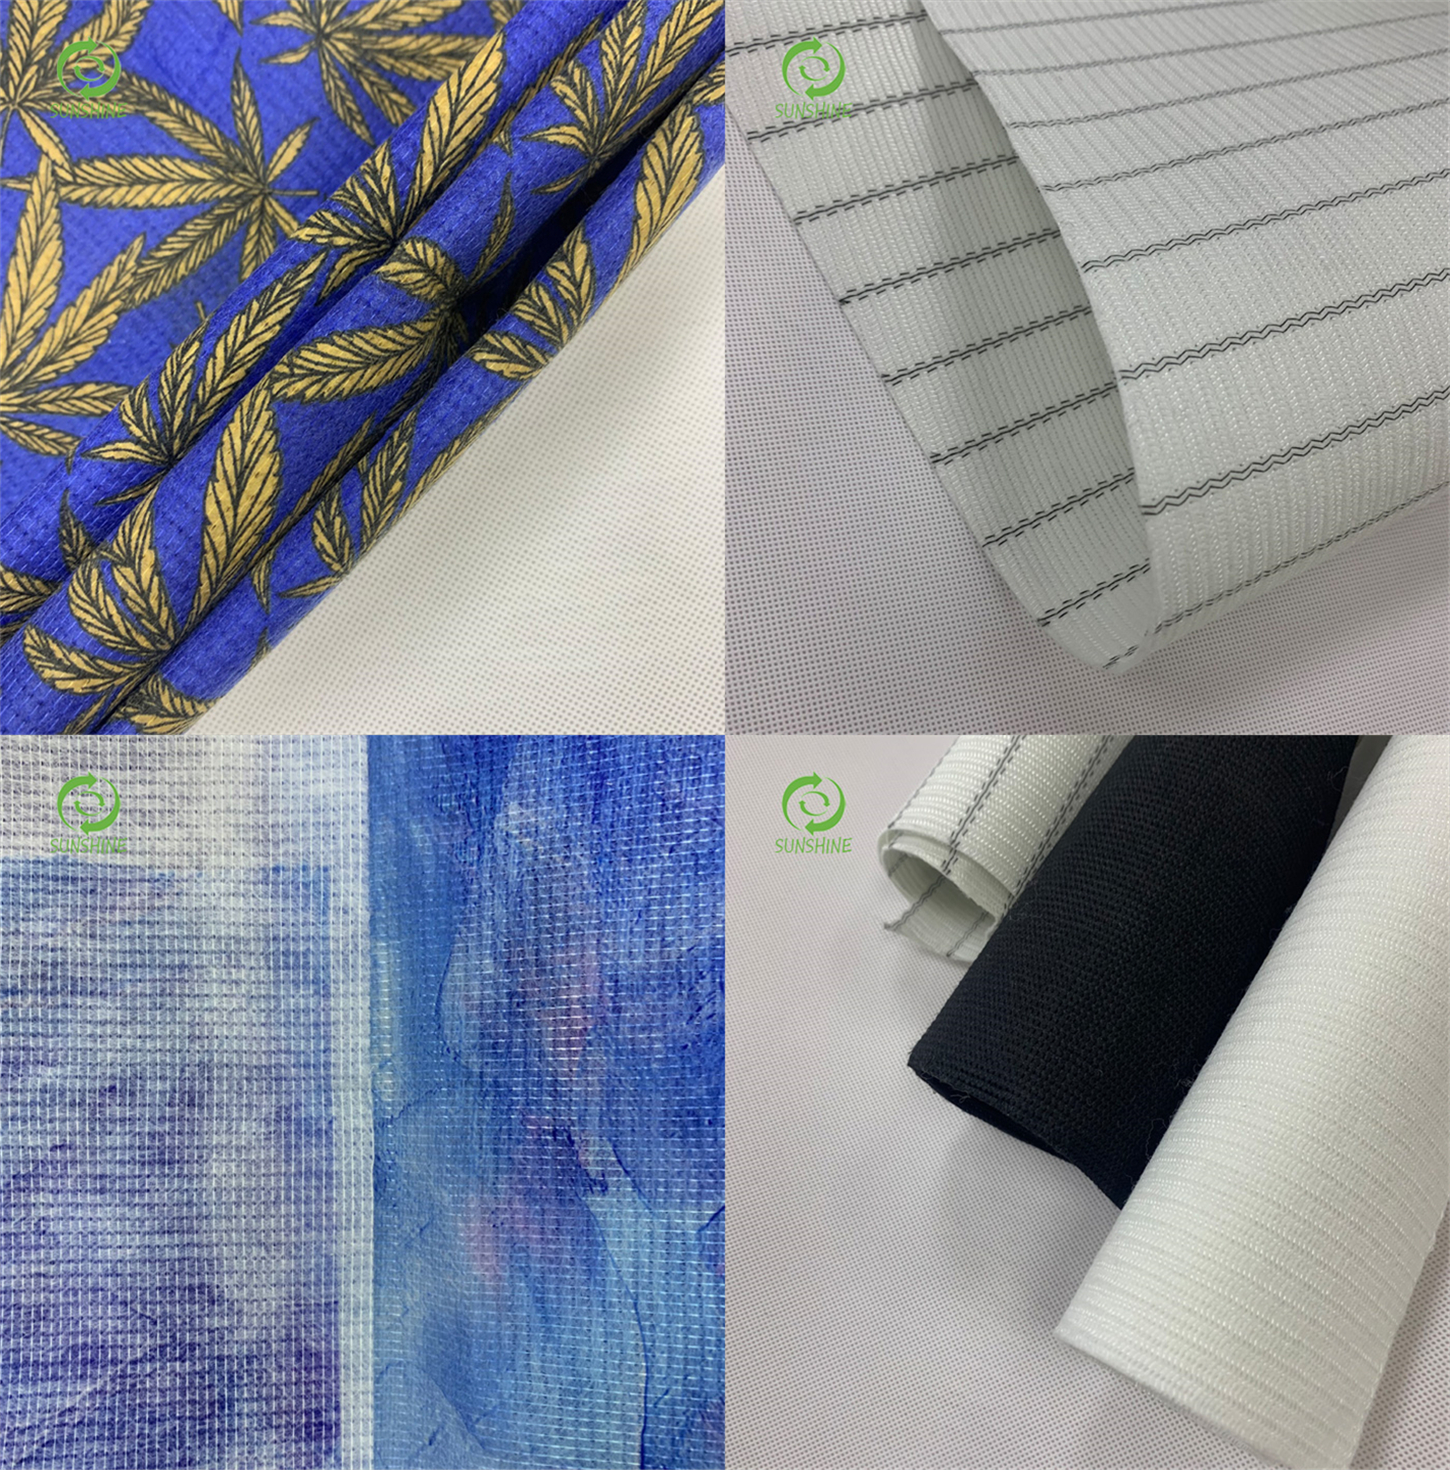 New Product 14/18/22f RPET 100% Polyester Stitchbond Nonwoven Fabric 